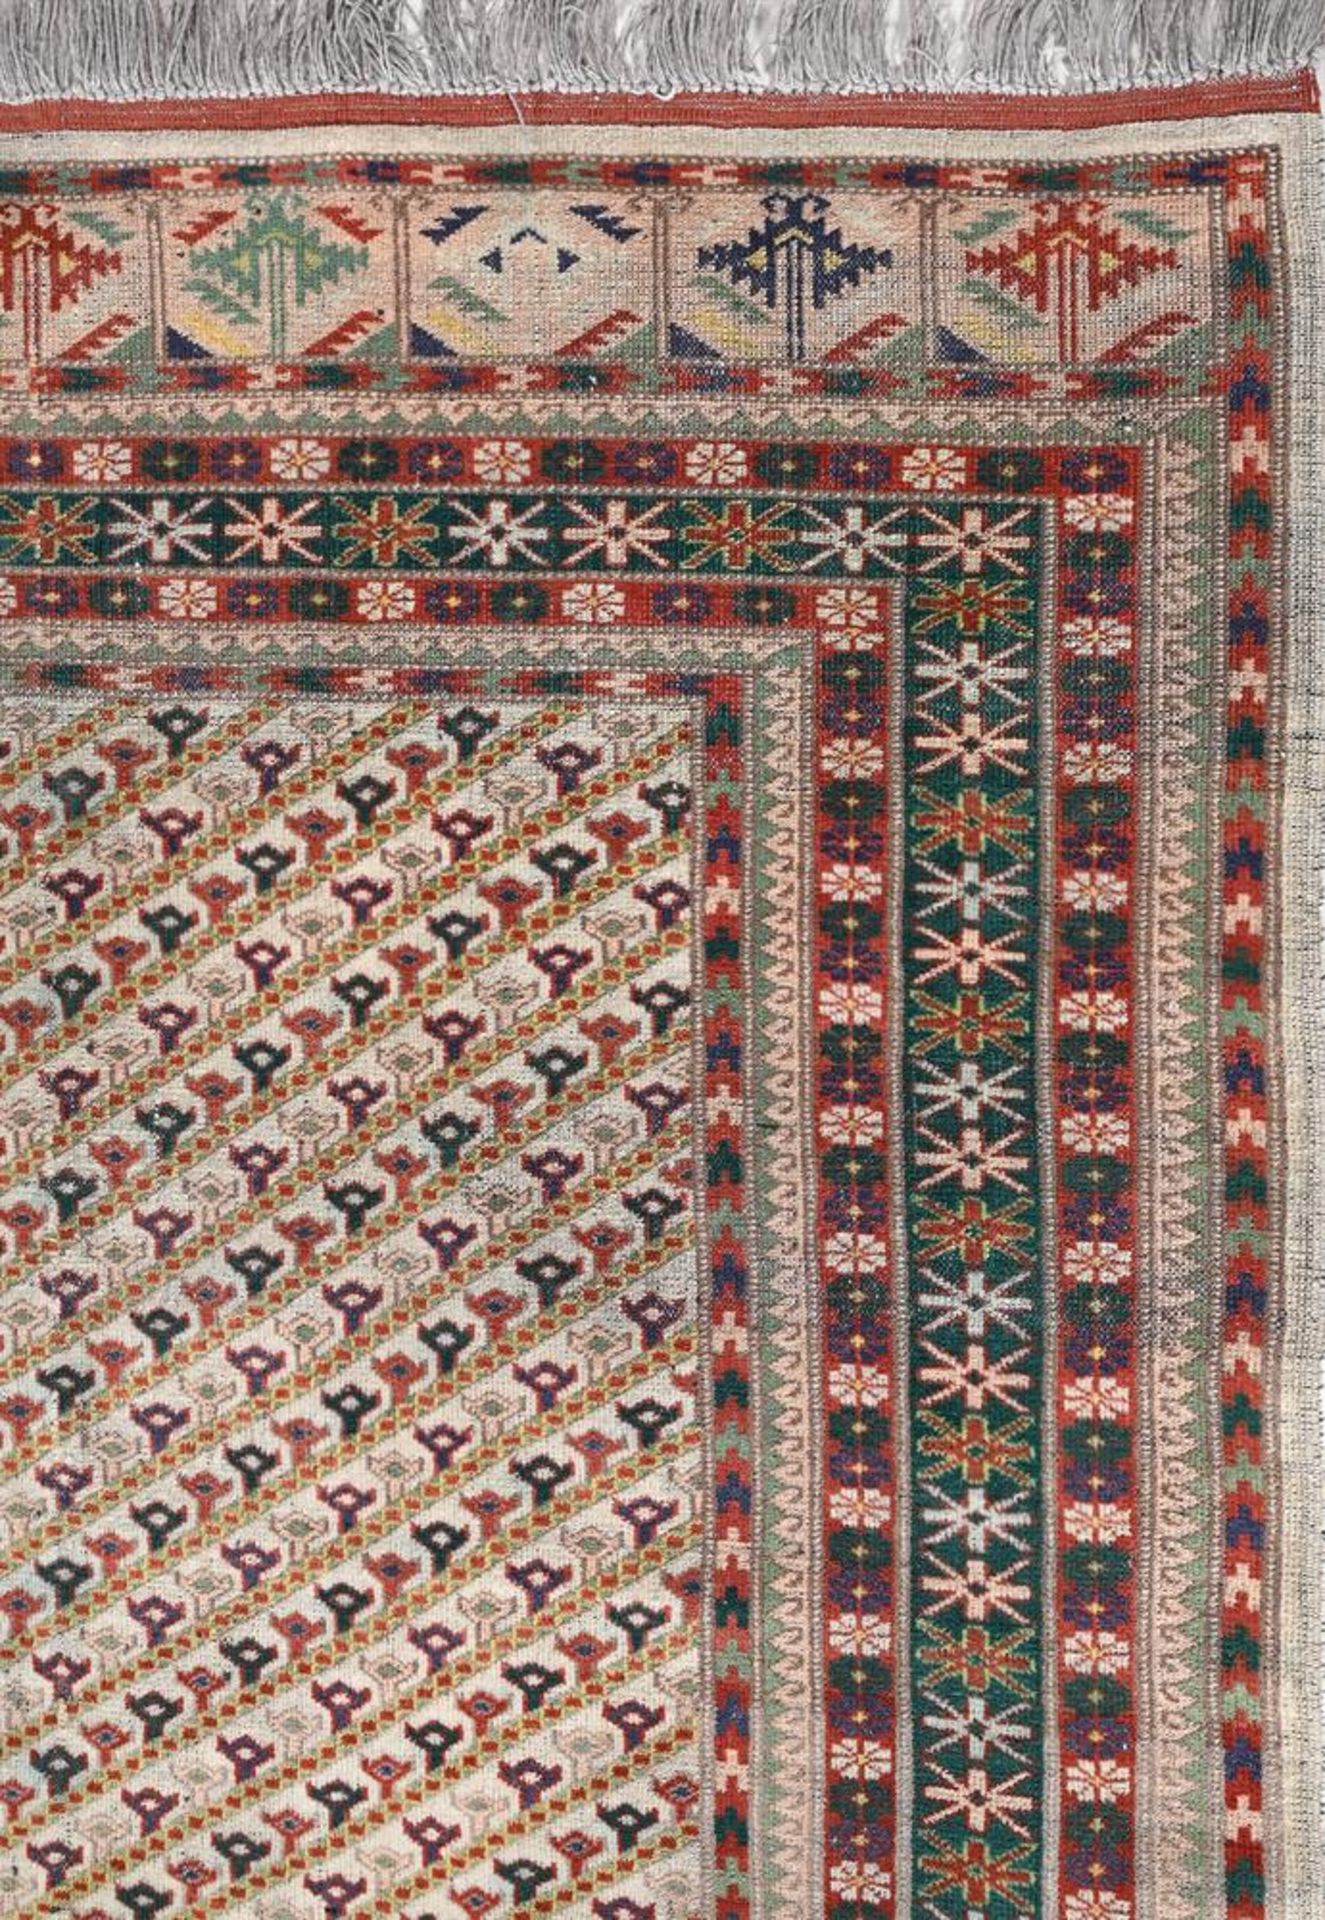 A NORTH WEST PERSIAN RUG - Image 2 of 2